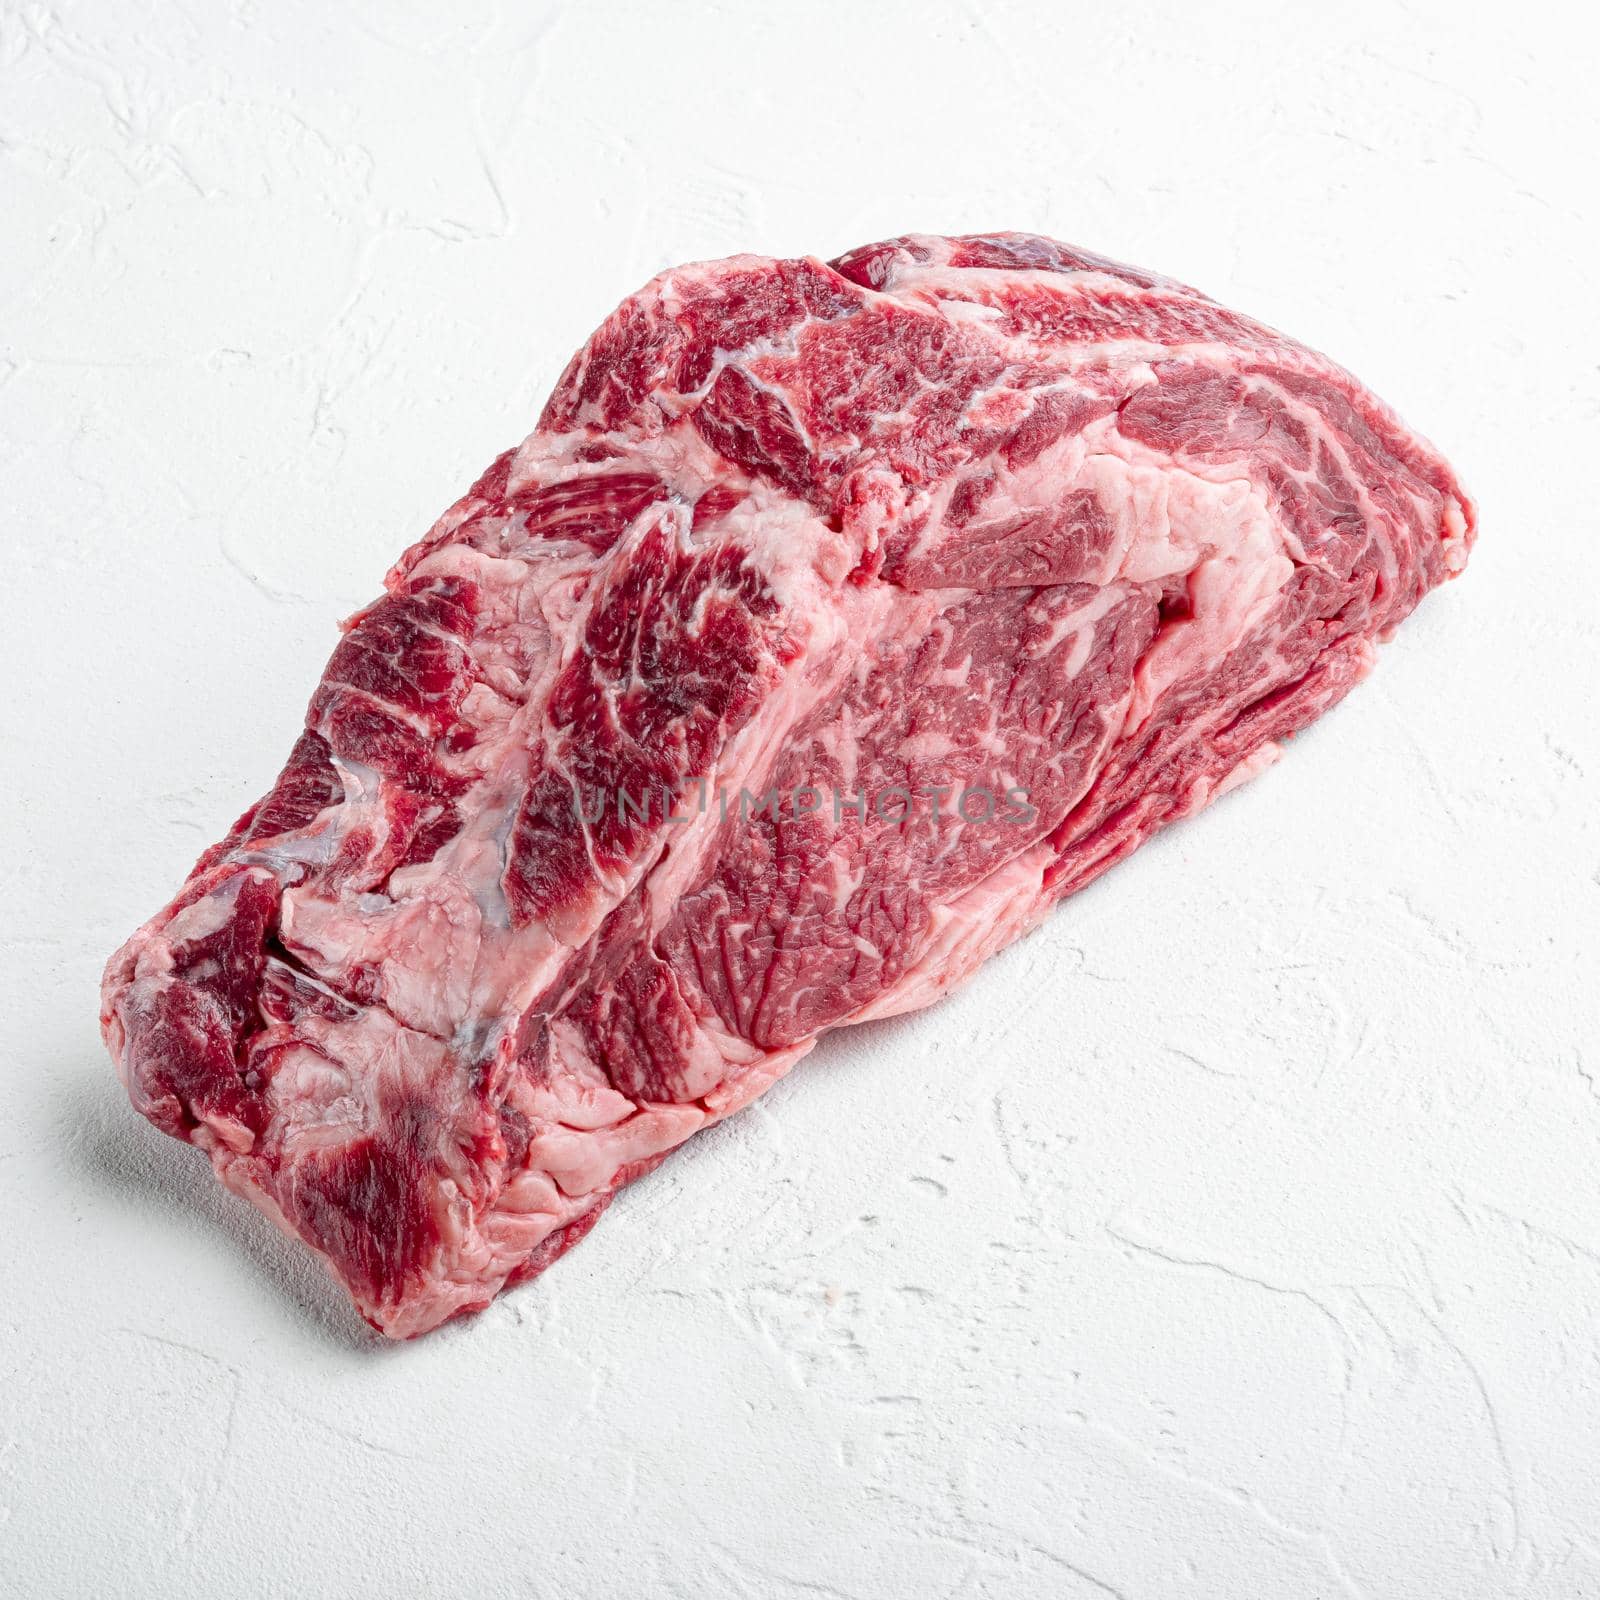 Raw Marble beef black Angus, ribeye or scotch fillet, square format, on white stone background by Ilianesolenyi